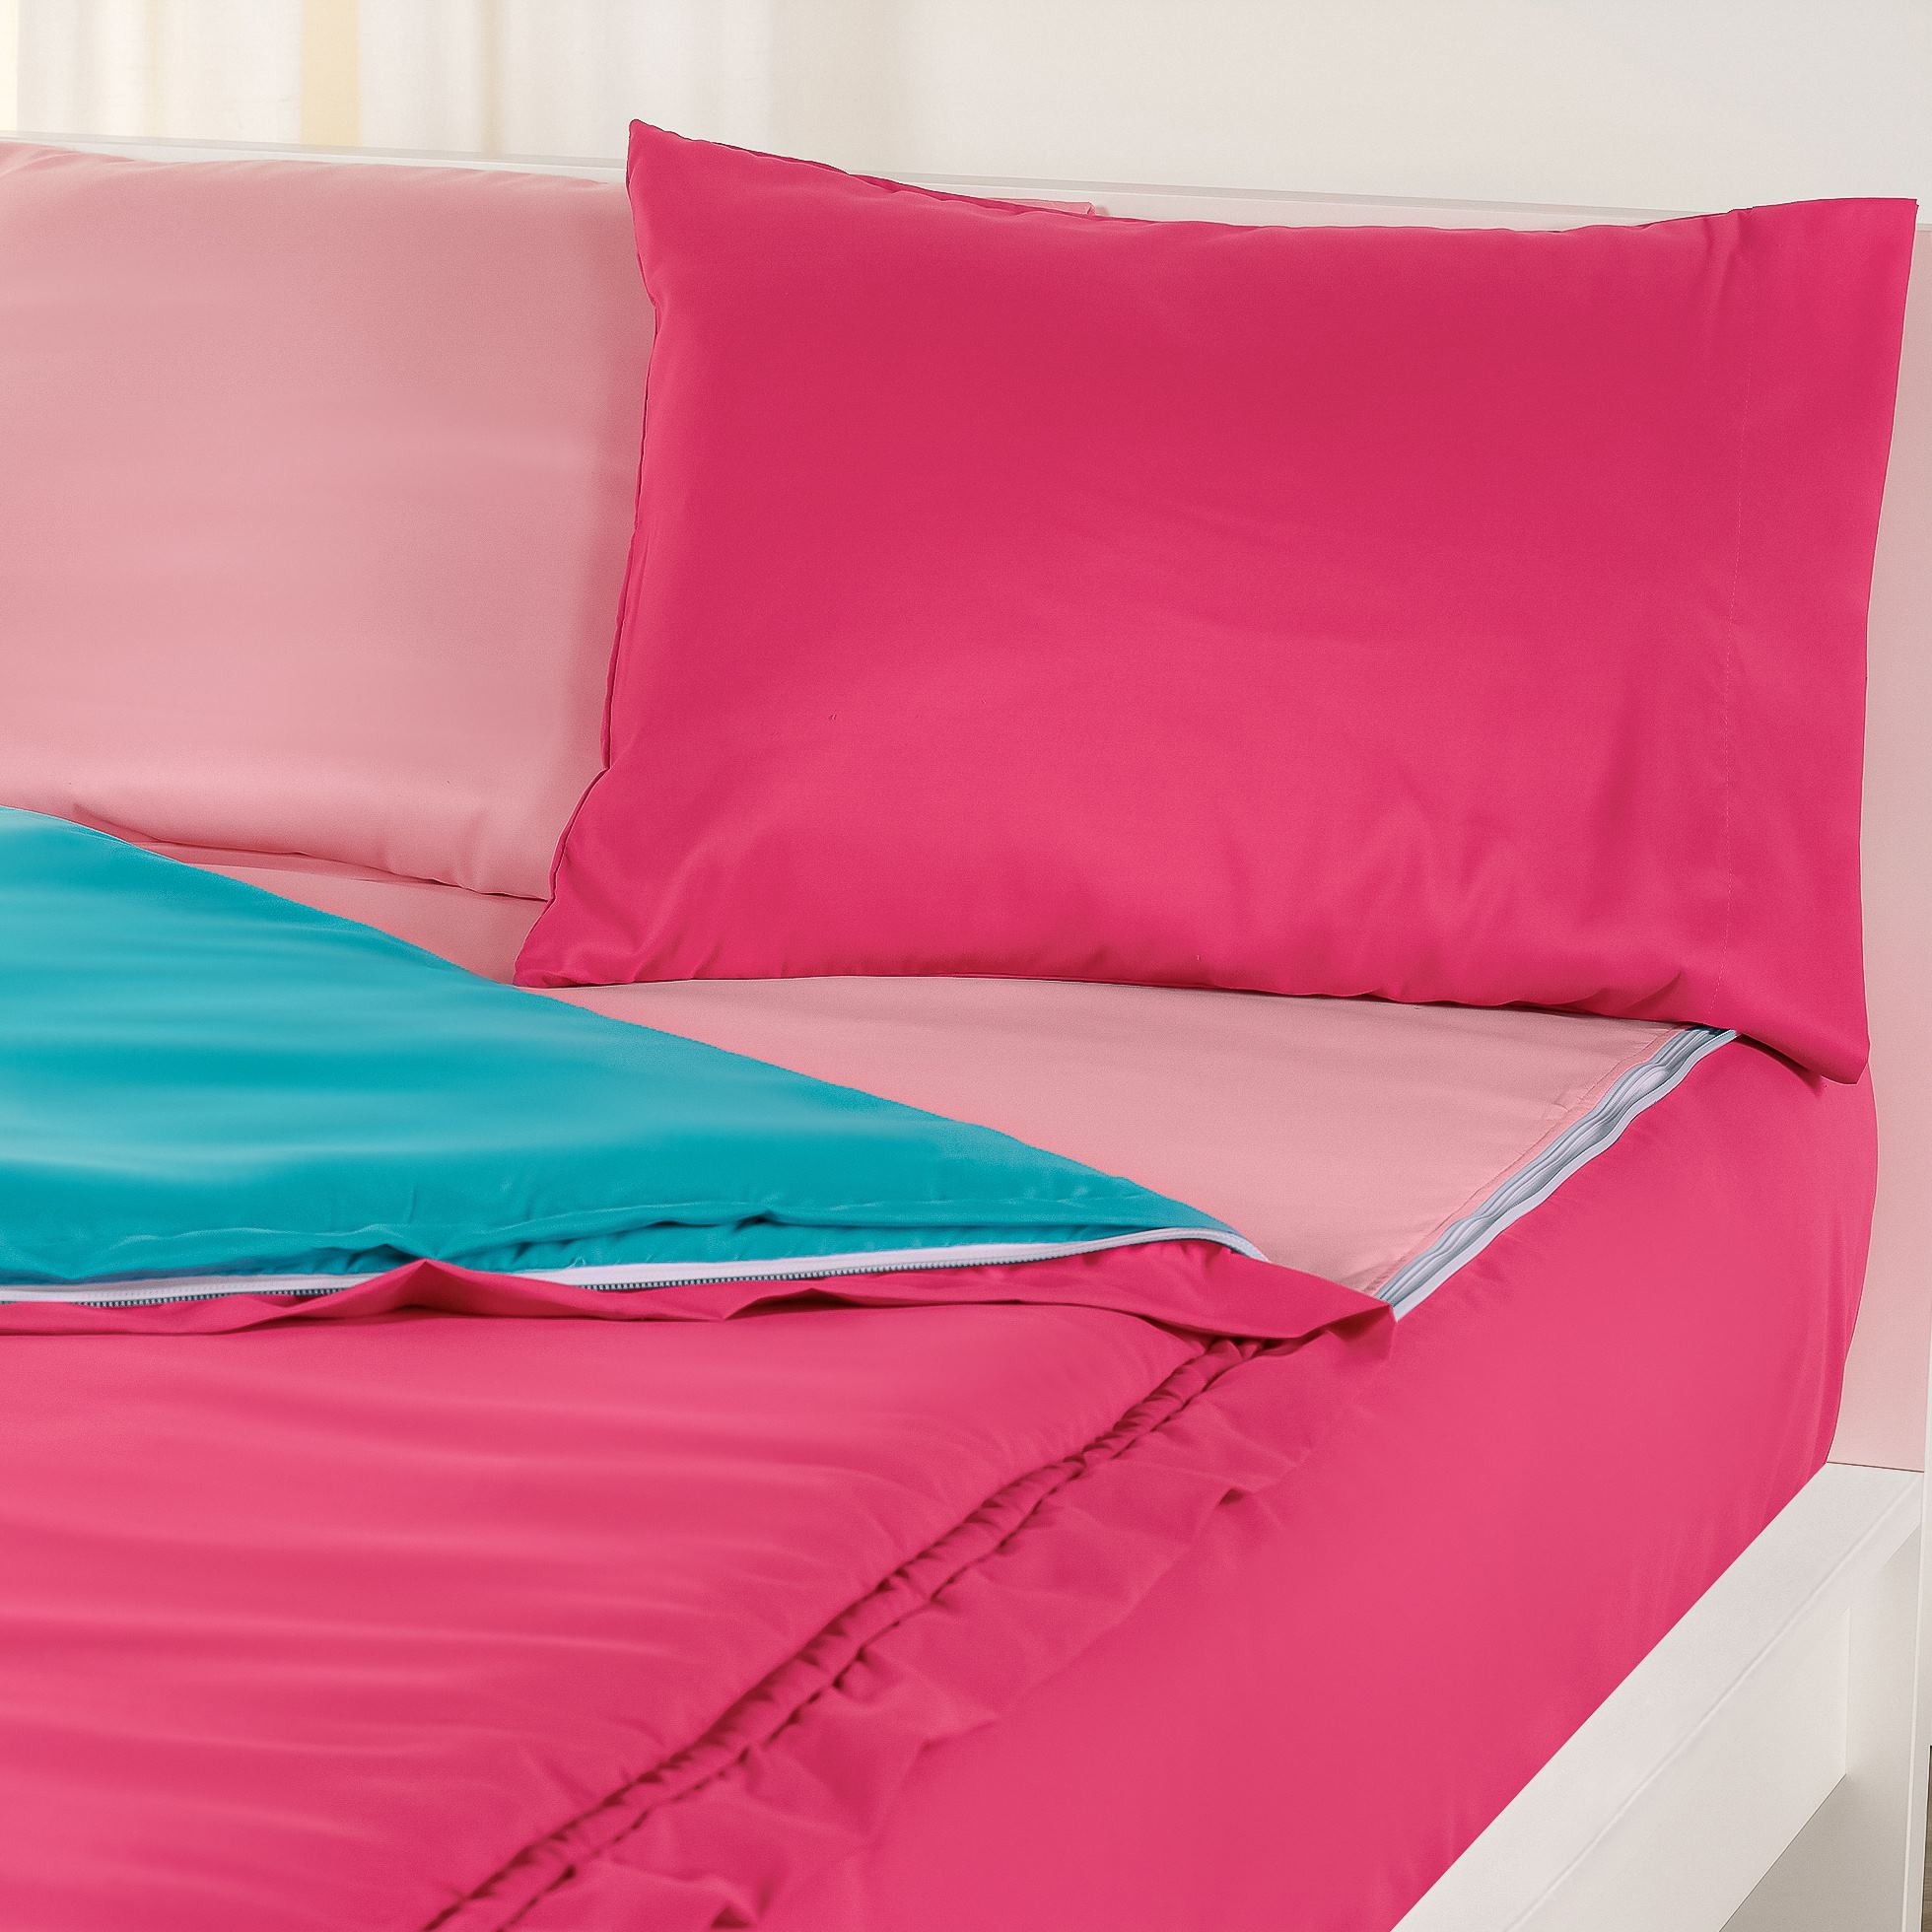 https://ak1.ostkcdn.com/images/products/is/images/direct/033f58f215aa75518573a2fc4f755b027ca1fcee/Siscovers-Hot-Pink-Bunkie-Deluxe-Zipper-Bedding-Set.jpg